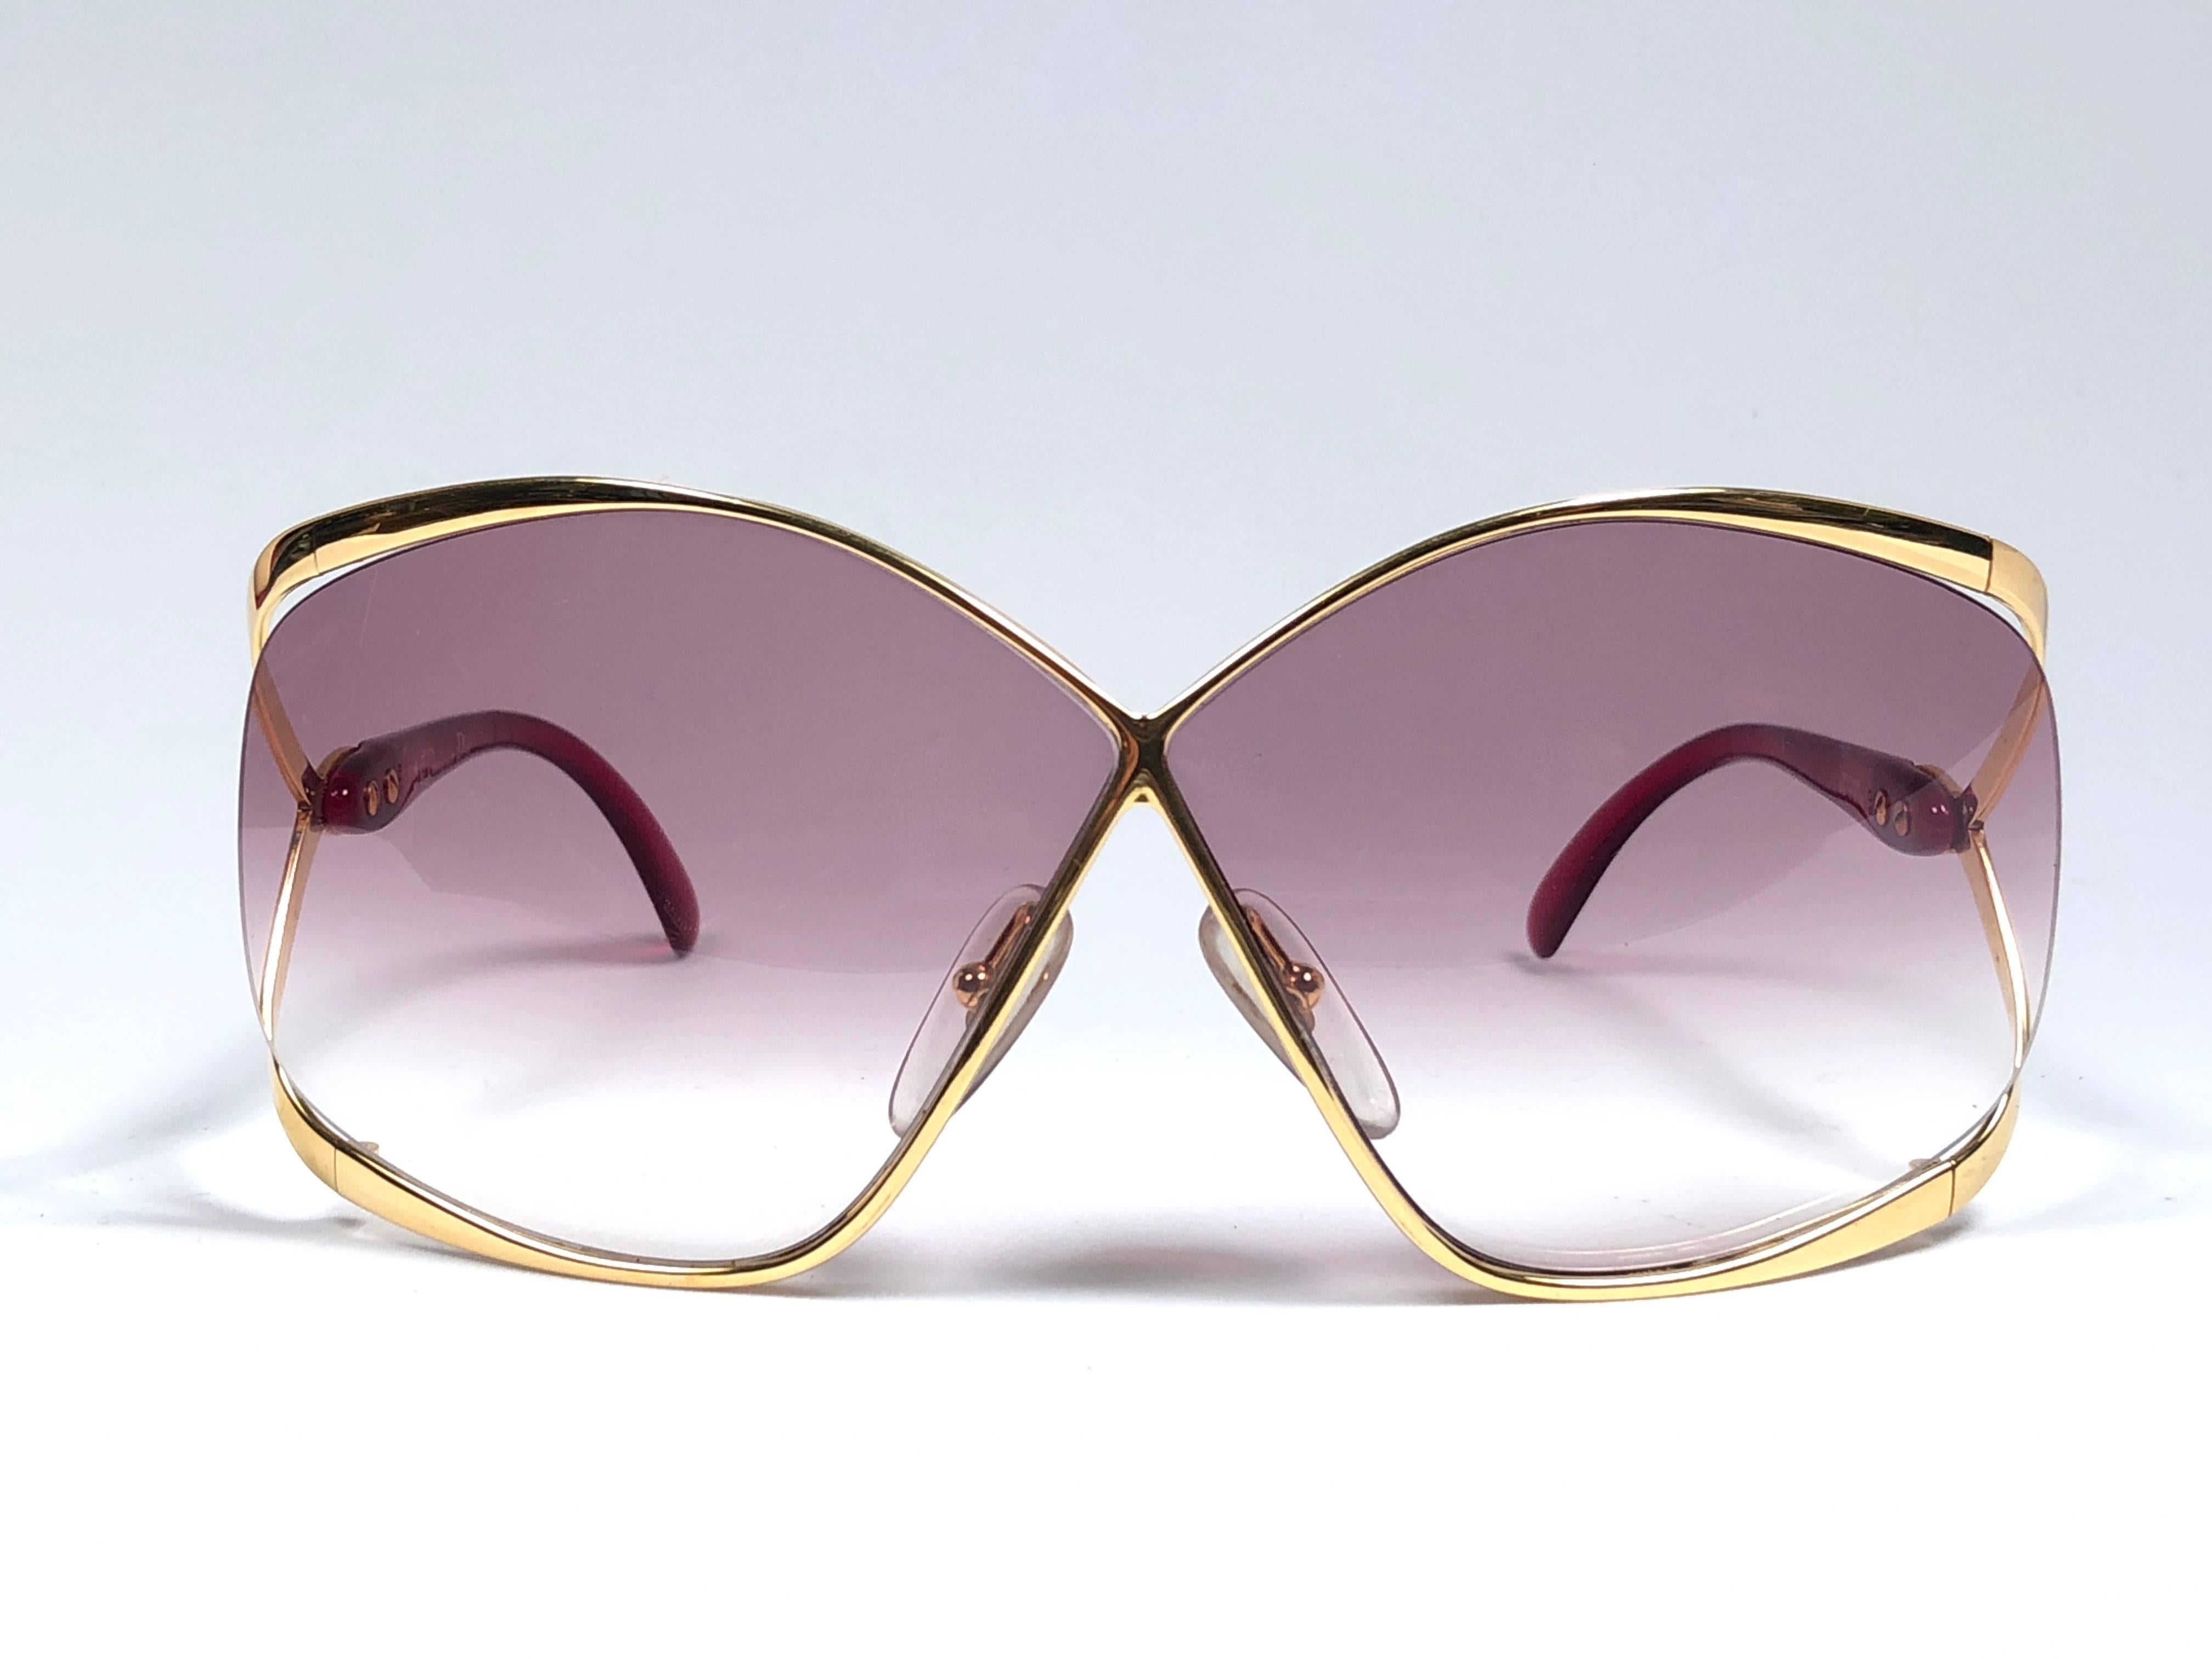 
 
Highly coveted Christian Dior butterly shape in gold & red. 
Spotless light rose gradient lenses. A collector’s piece!
 
Come with its original Christian Dior lunettes sleeve.

This item may show minor sign of wear due to storage.
 
New, never